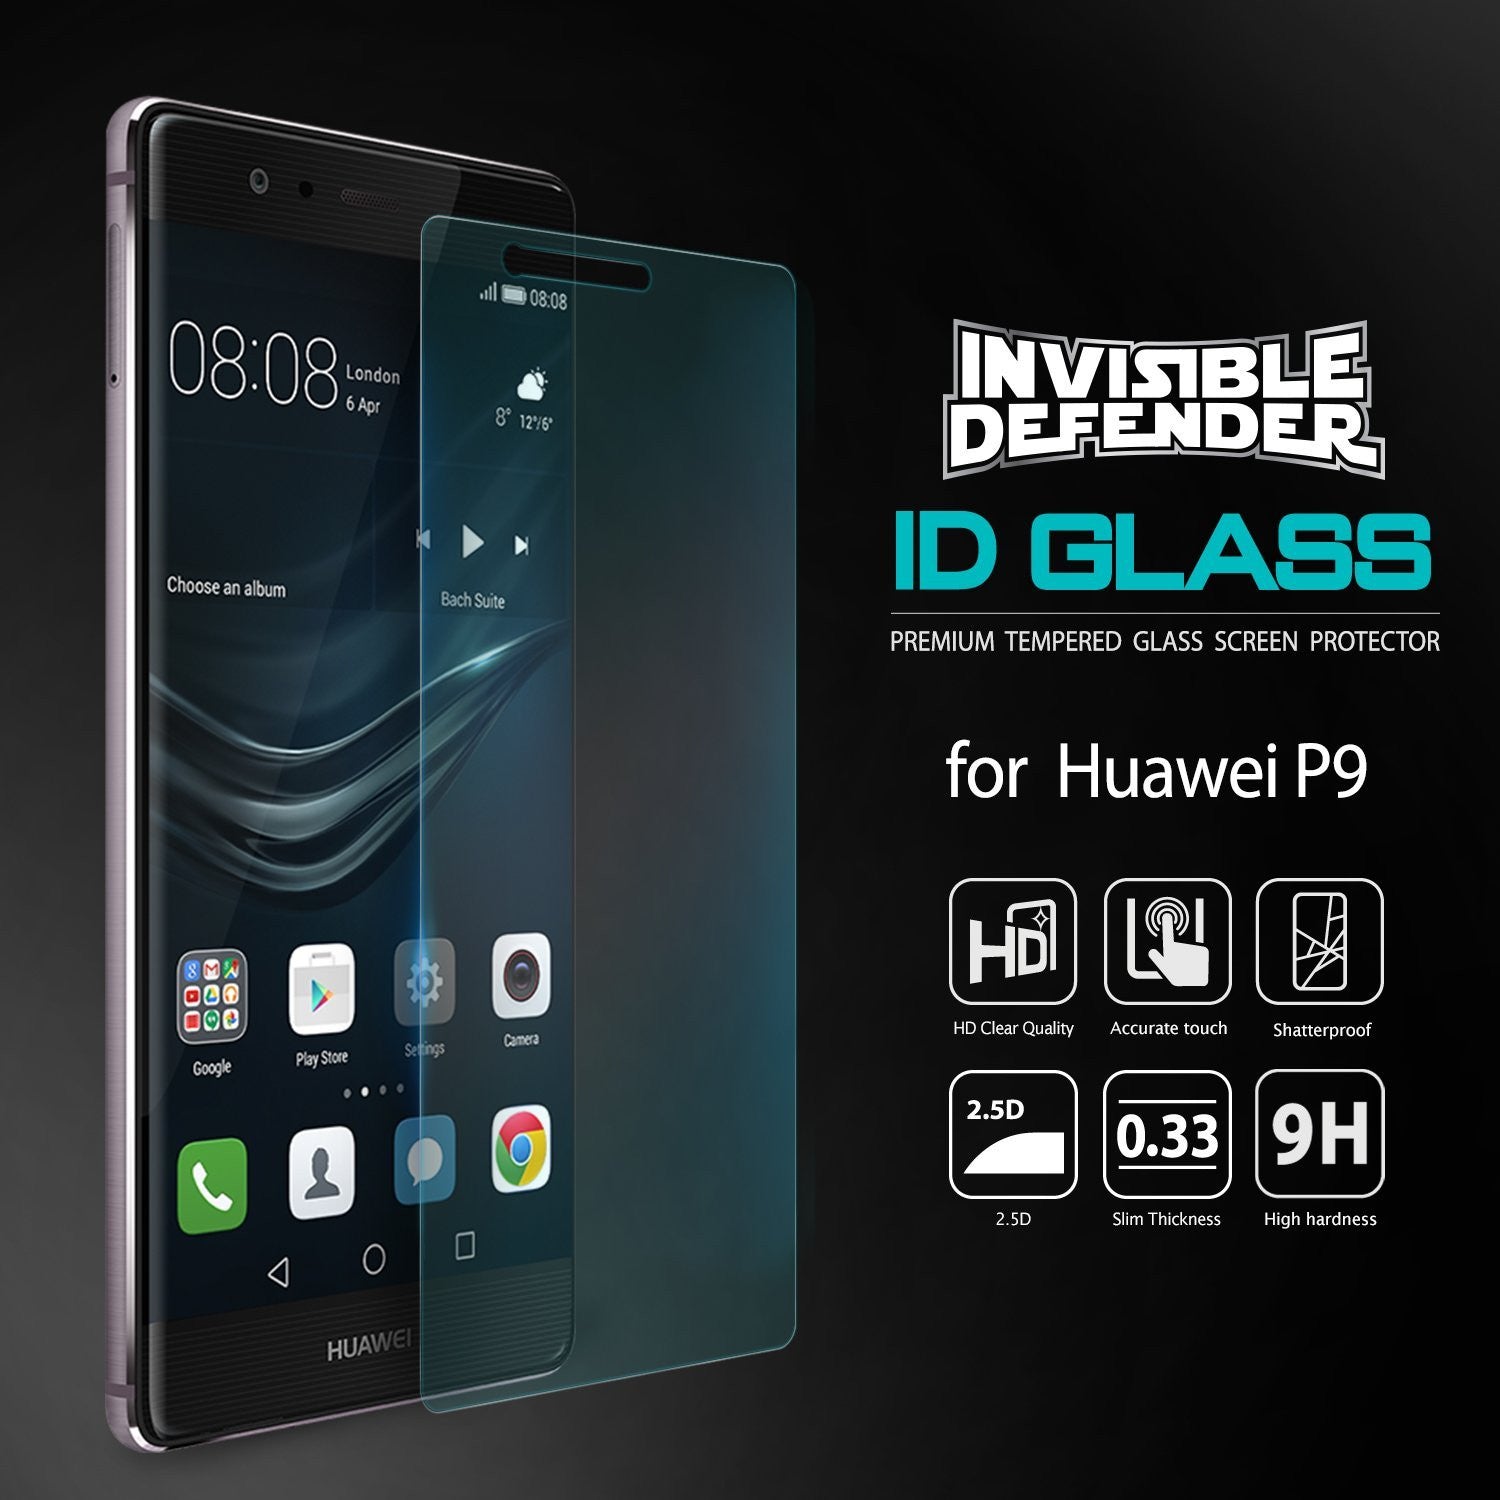 huawei p9, ringke invisible defender 0.33mm tempered glass screen protector